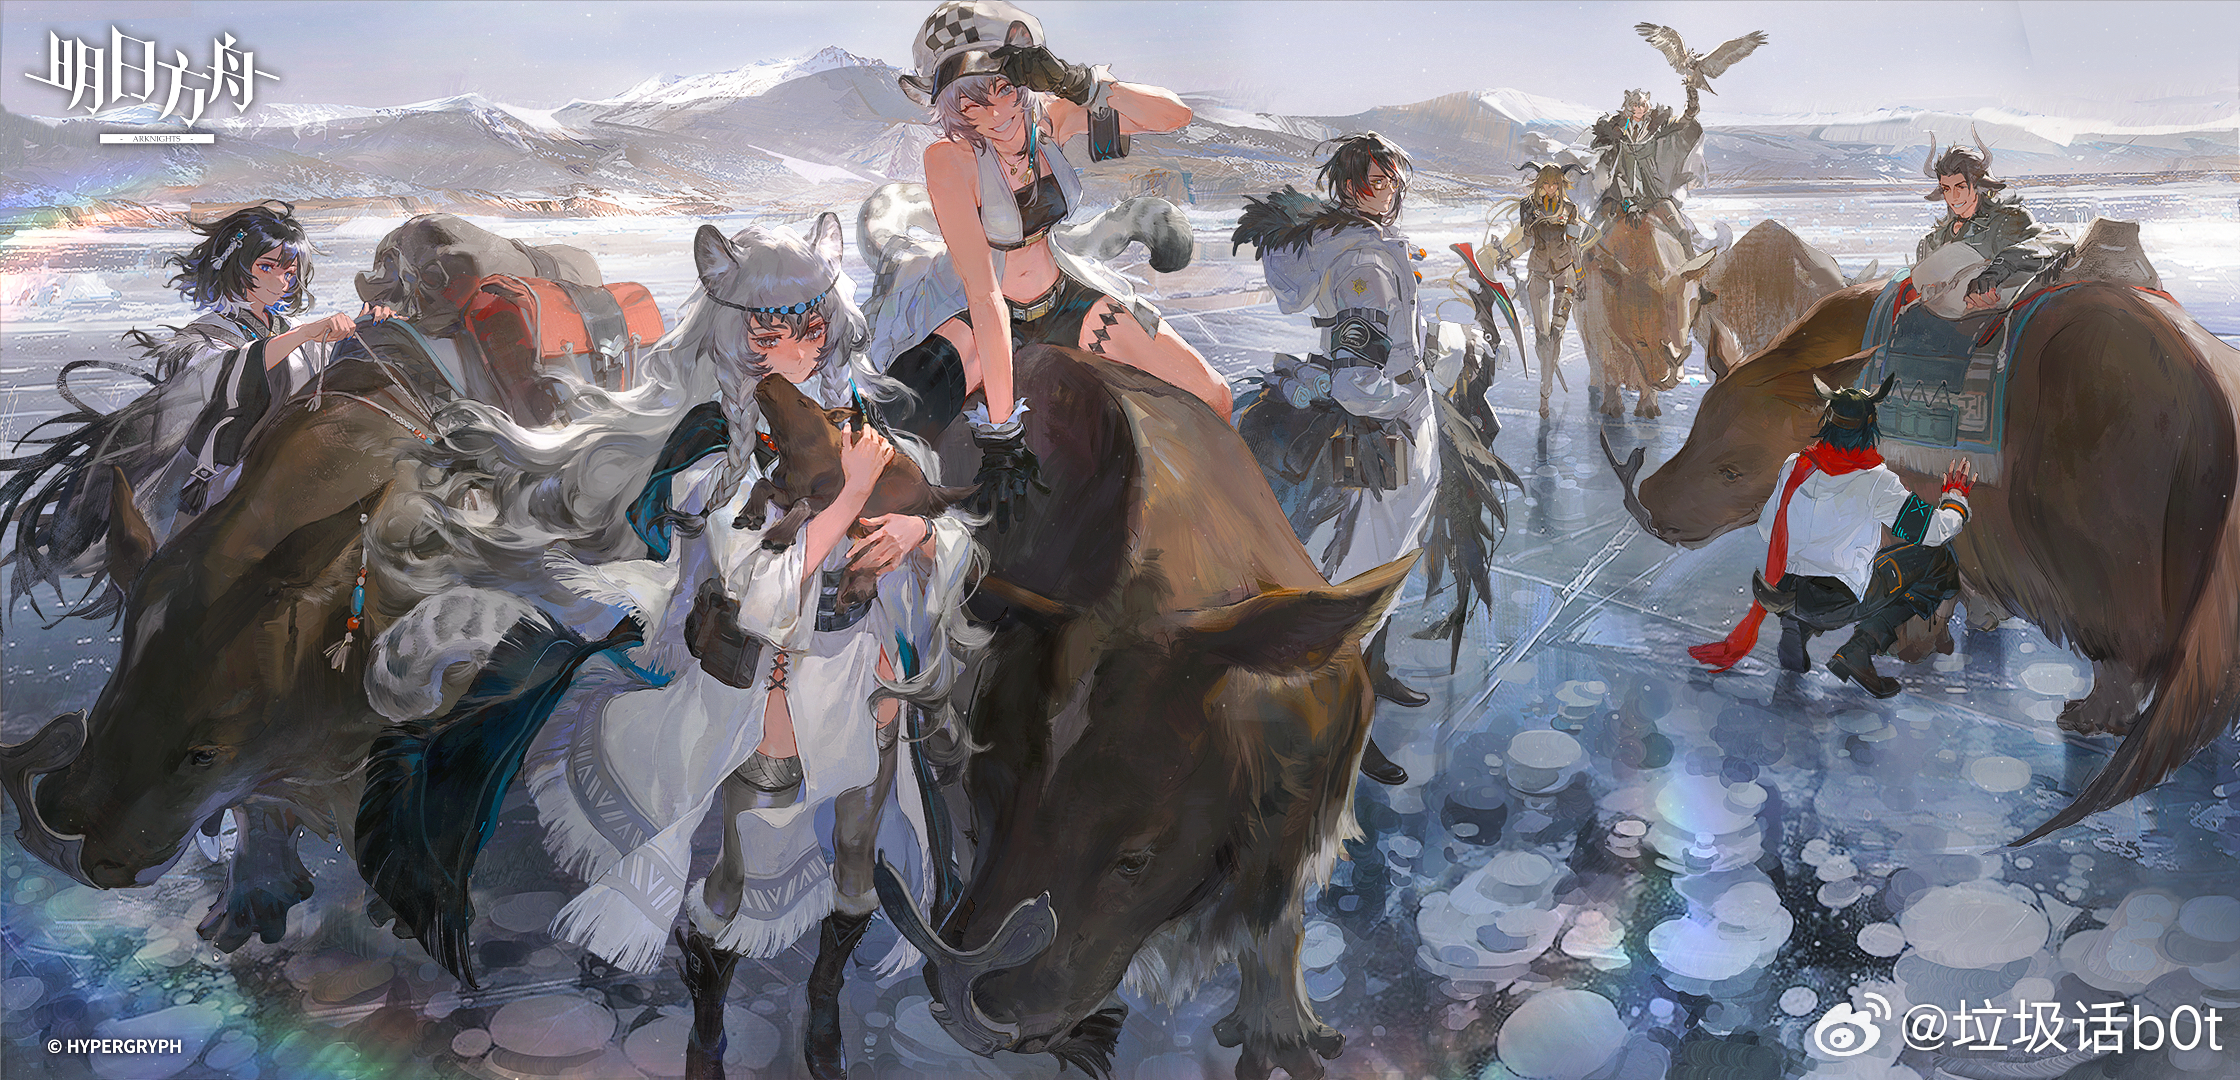 Arknights Creamyghost Group Of People Animals Snow Ice Horns 2240x1080